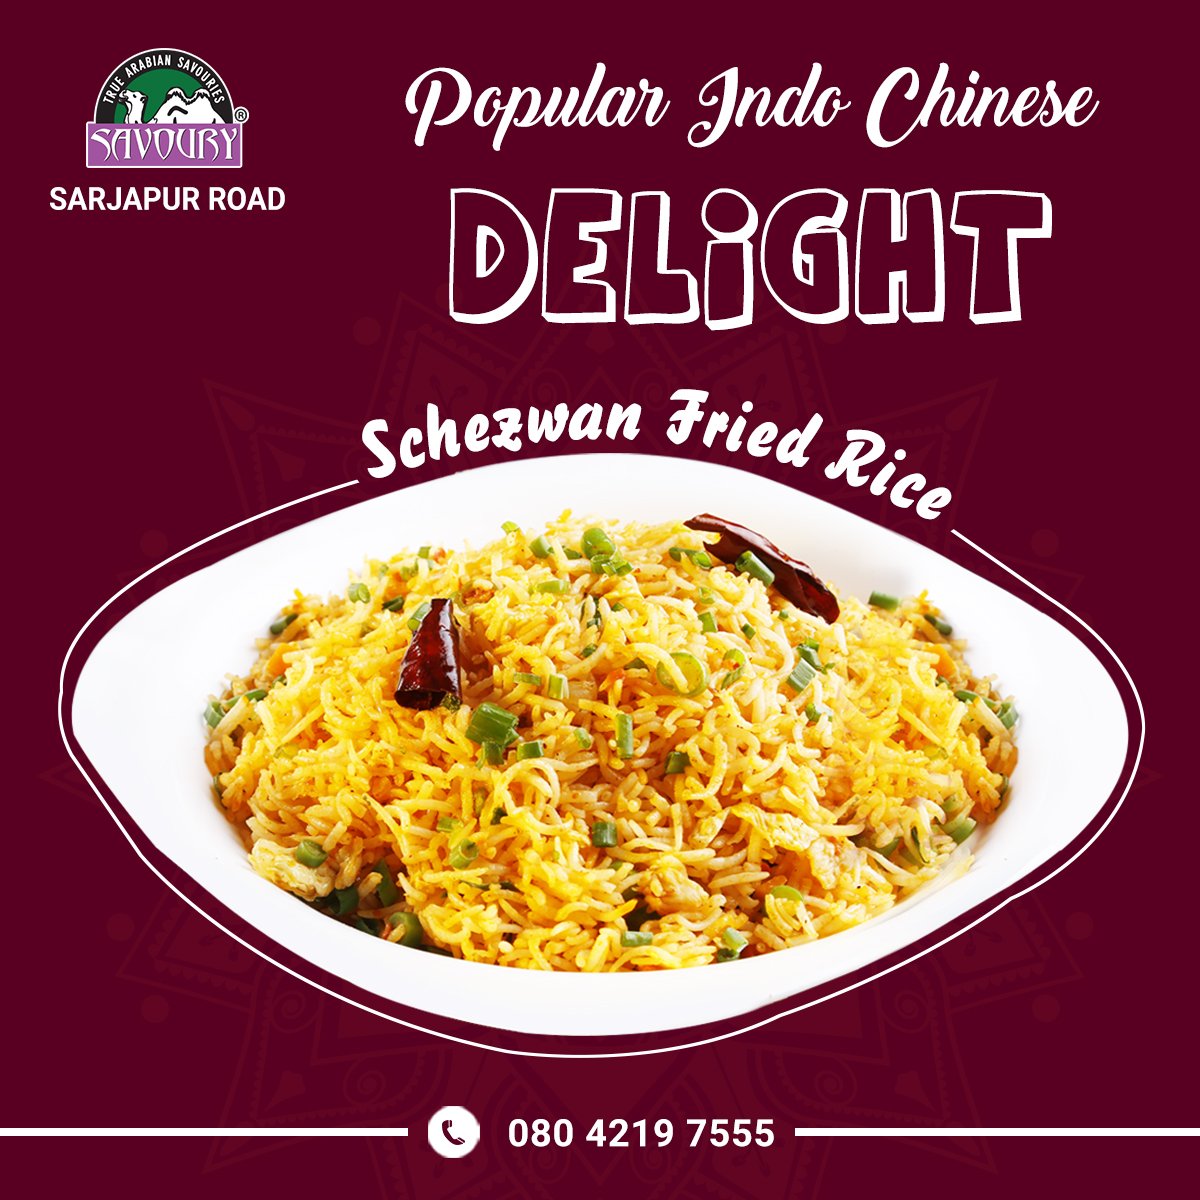 Schezwan fried rice, spicy and delicious meal option for both lunch and dinner. Visit Savoury and enjoy this Indo-Chinese delight.

#schezwanfriedrice #schezwan #friedrice #spicy #food #foodies #foodlove #chinese #chinesecuisine #savoury #restaurant #savourysarjapur #bengaluru